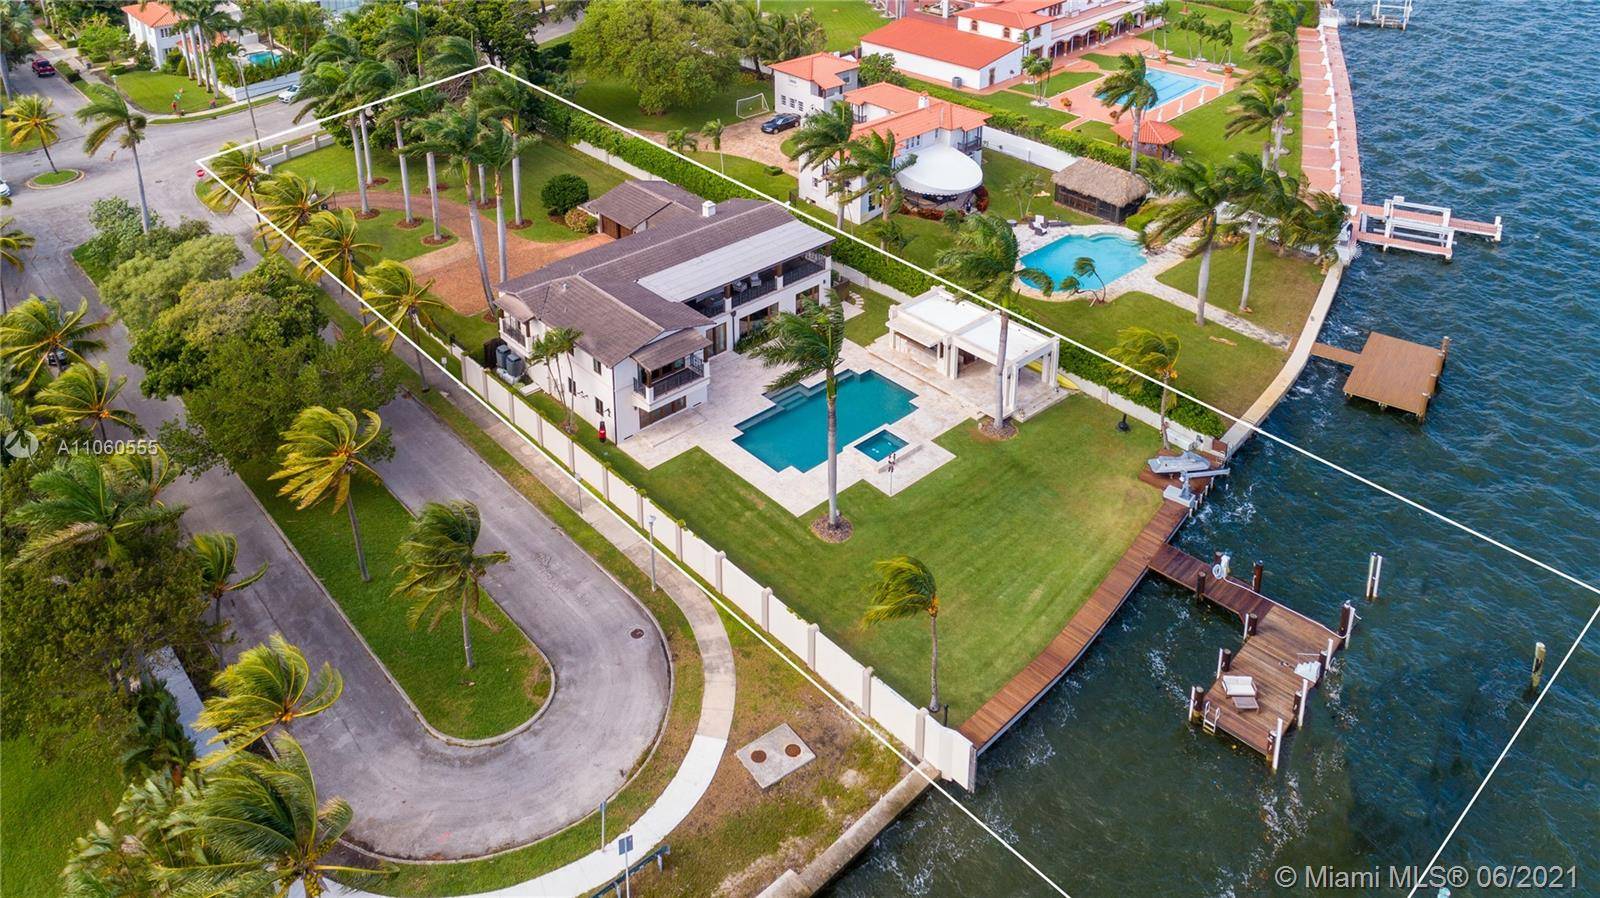 Majestic Estate located in Historic Morningside on a gated 30, 100 SF corner lot surrounded by lush greenery, manicured lawns and 100ft of wide bay waterfront.